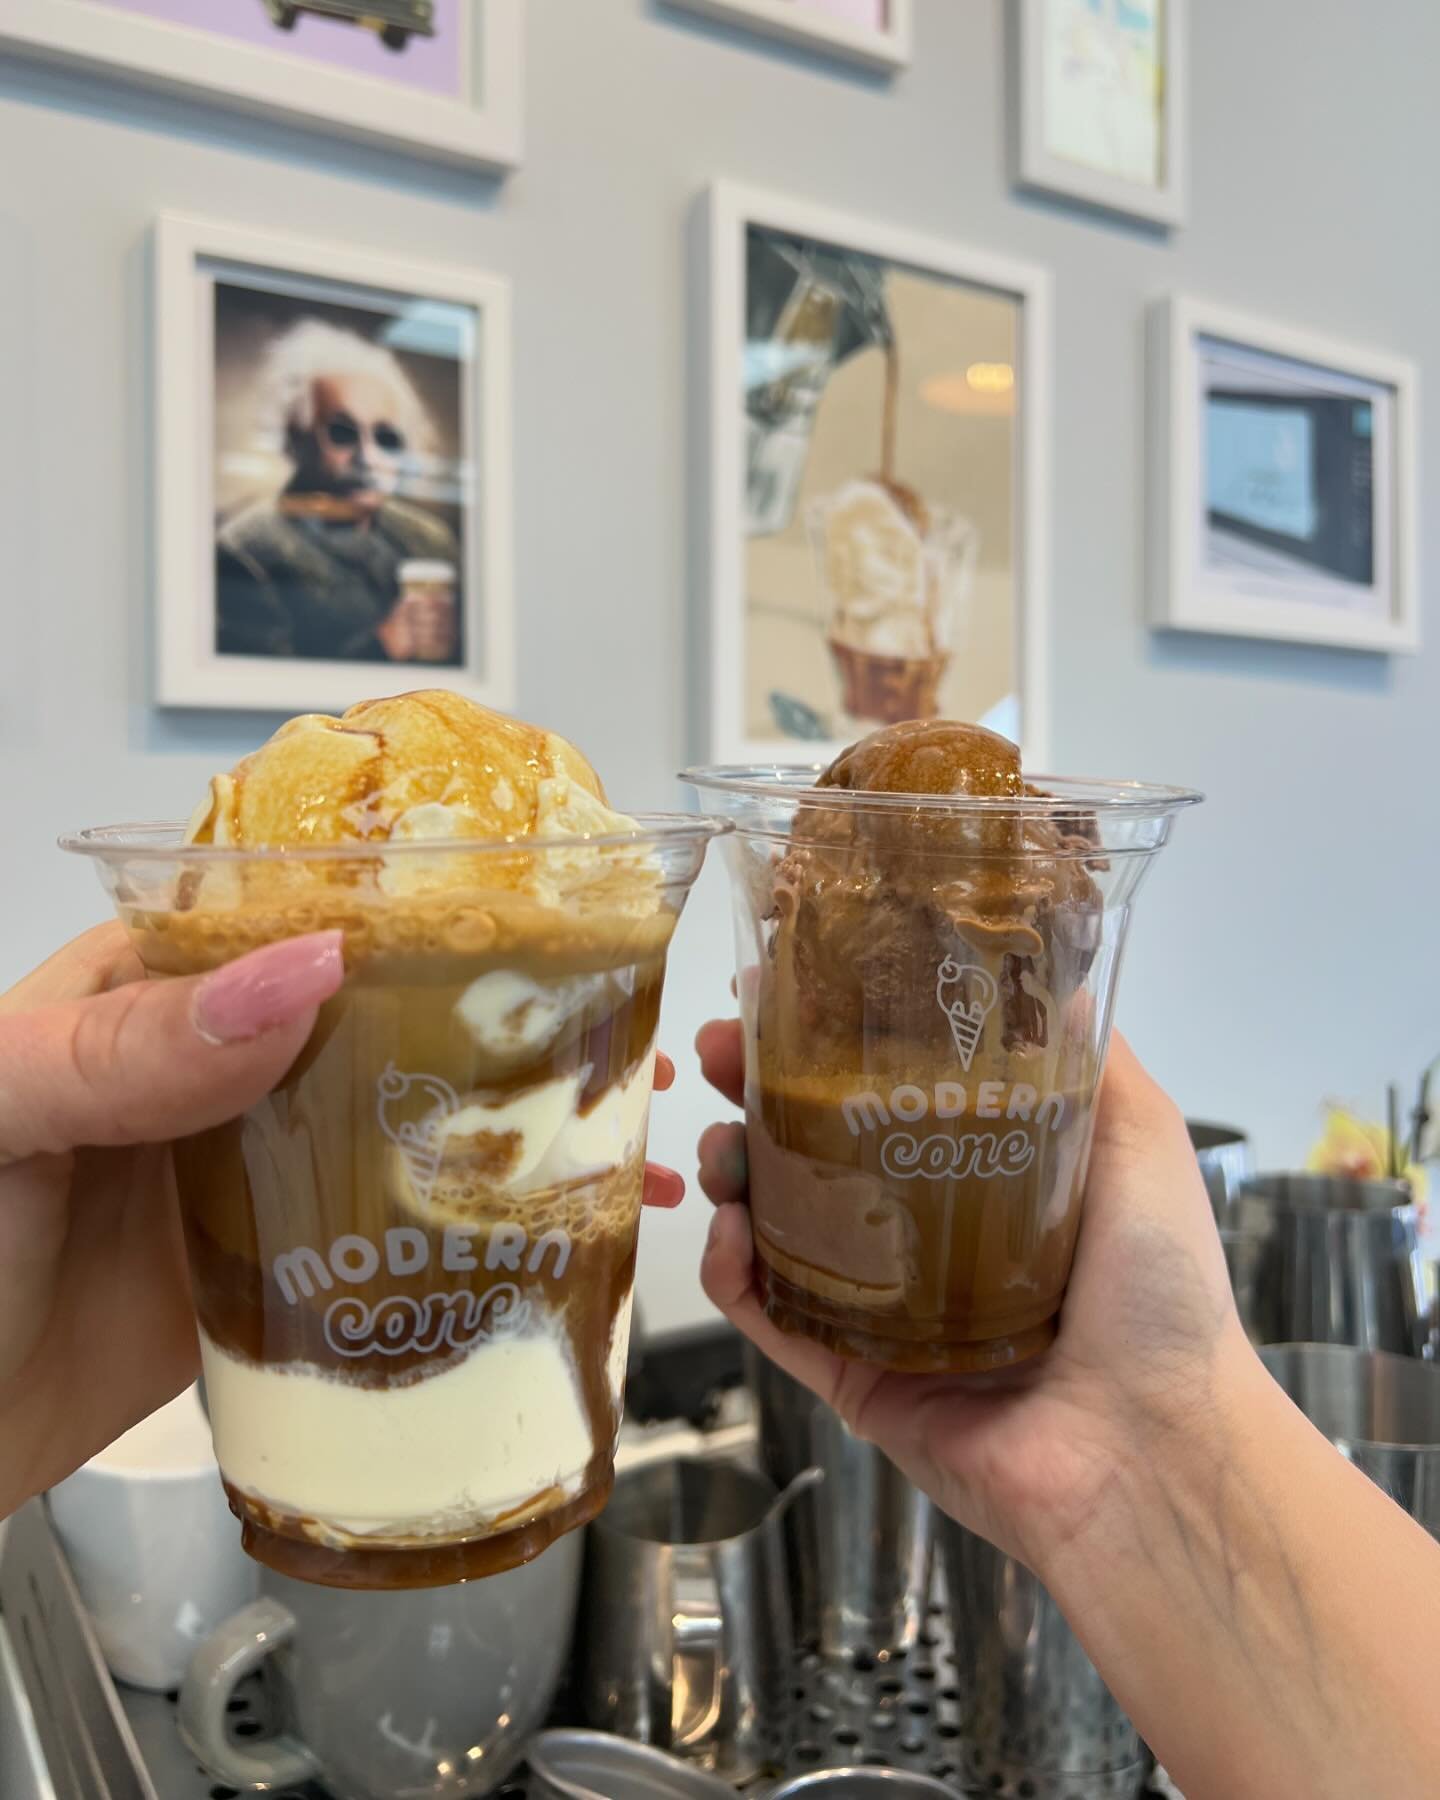 ICE CREAM + ESPRESSO
your two favorite things in one 💞

we can make you an affogato with any flavor of ice cream! what would you have it with?? 

📍 @moderncone 

#moderncone #metrodetroitfoodie